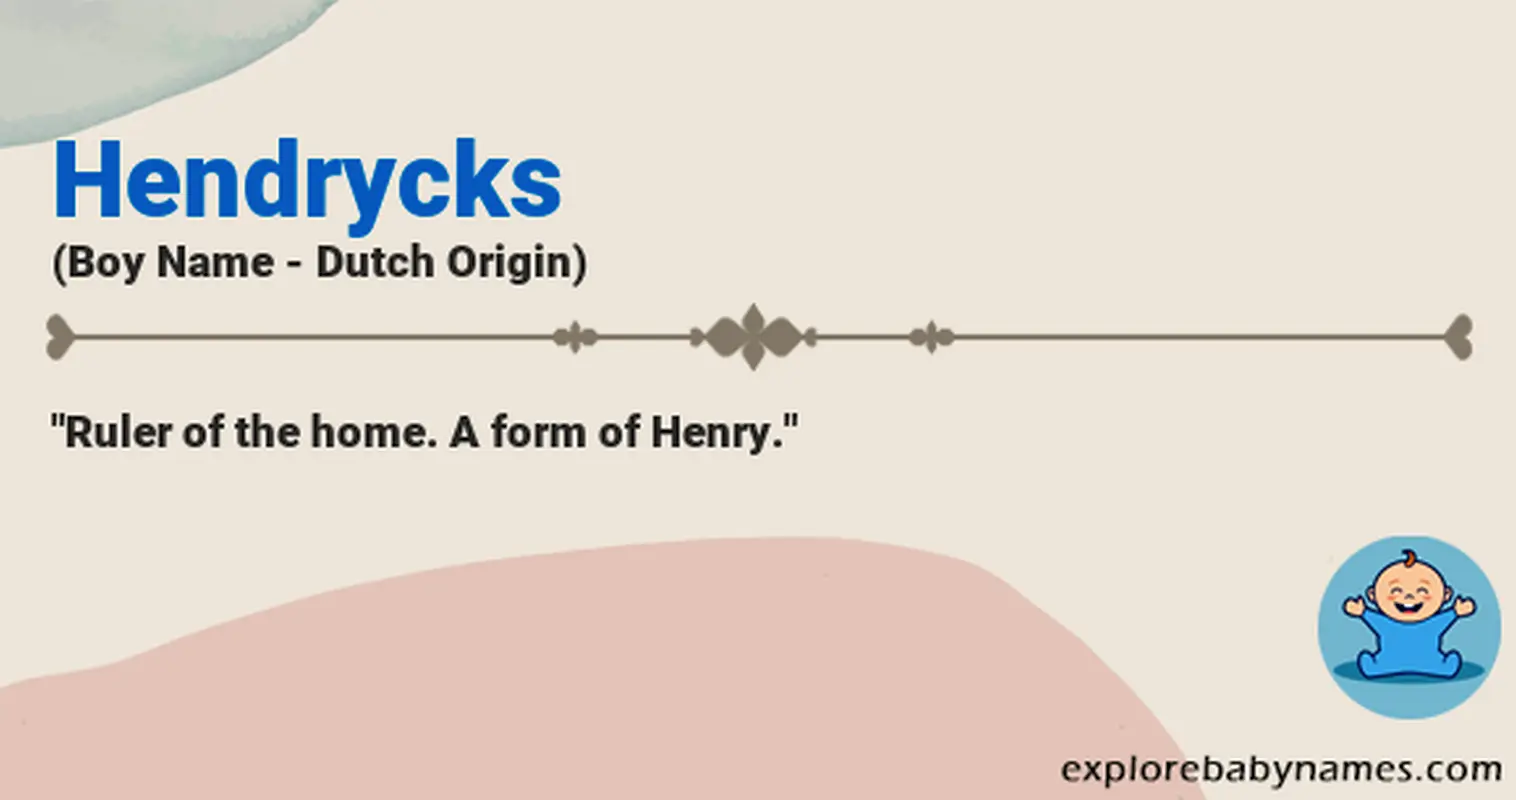 Meaning of Hendrycks